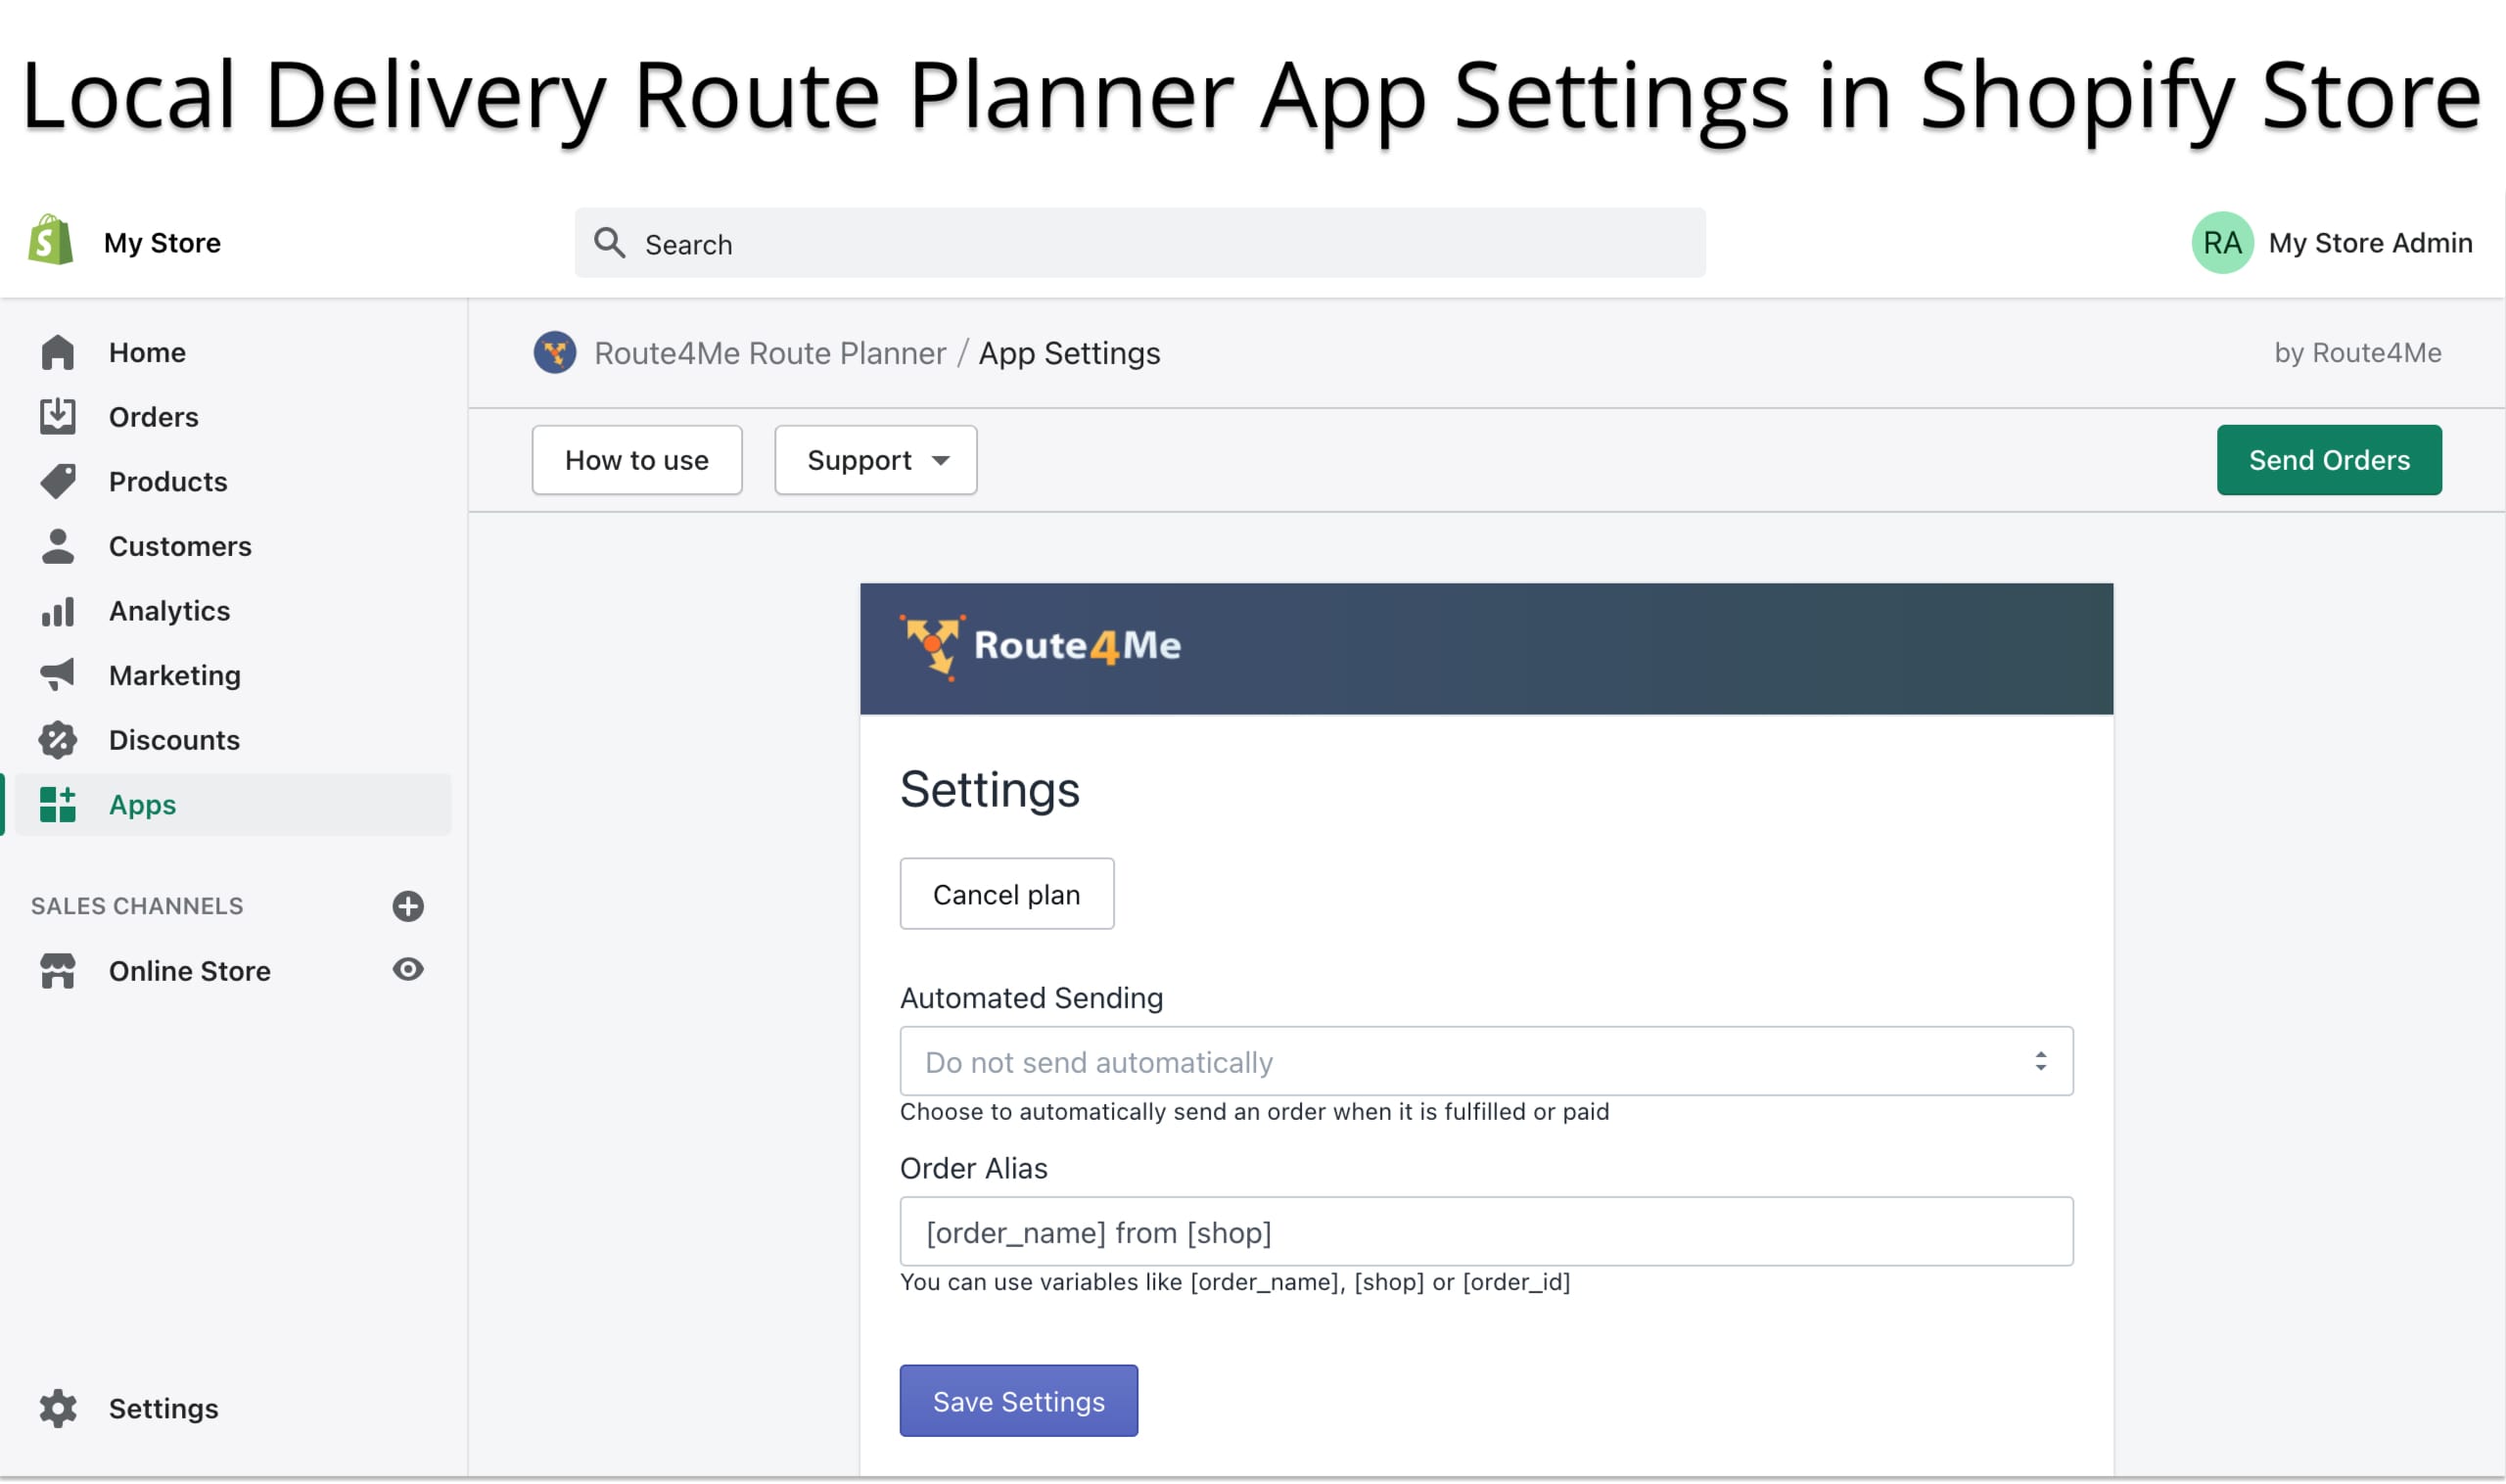 Shopify Local Delivery Route Planner app settings for sending orders from a store to the app.